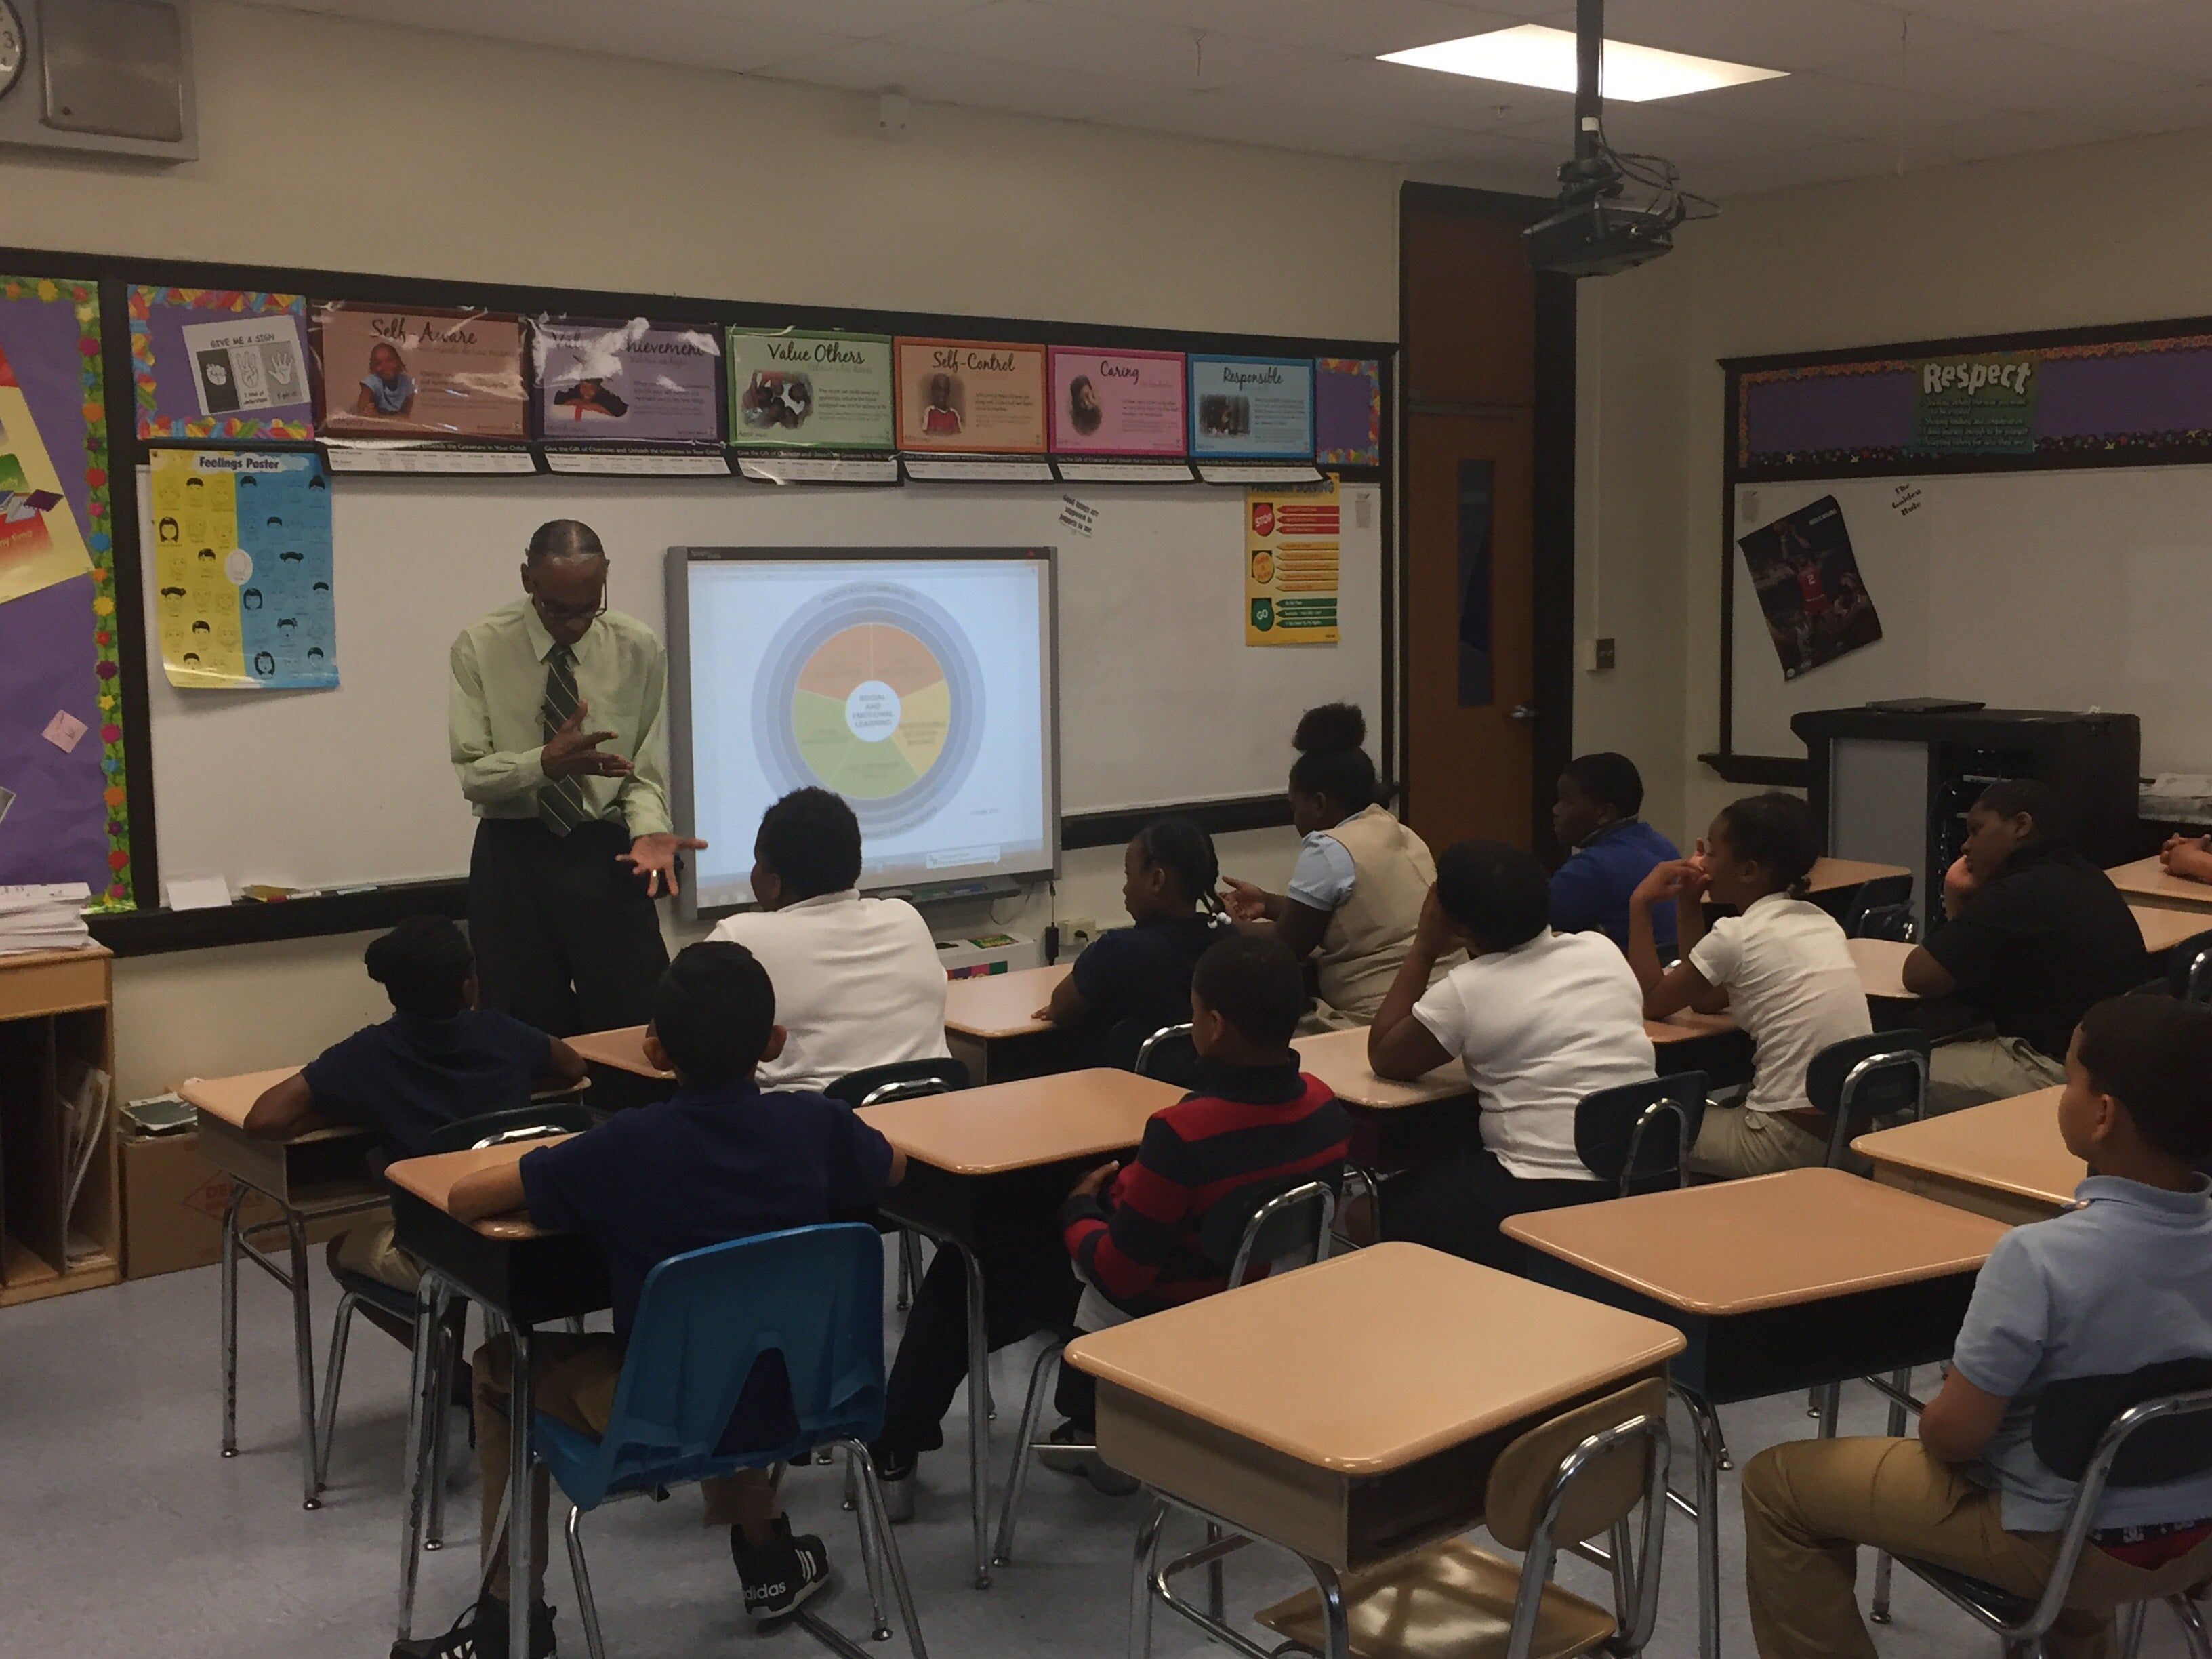  Harold Pritchett teaches his class in social and emotional learning at Warner Elementary School. Warner is one of six high-poverty schools in Wilmington that are struggling to improve after being targeted for possible closure in 2014 by then-Gov. Jack Markell. (Cris Barrish/WHYY) 